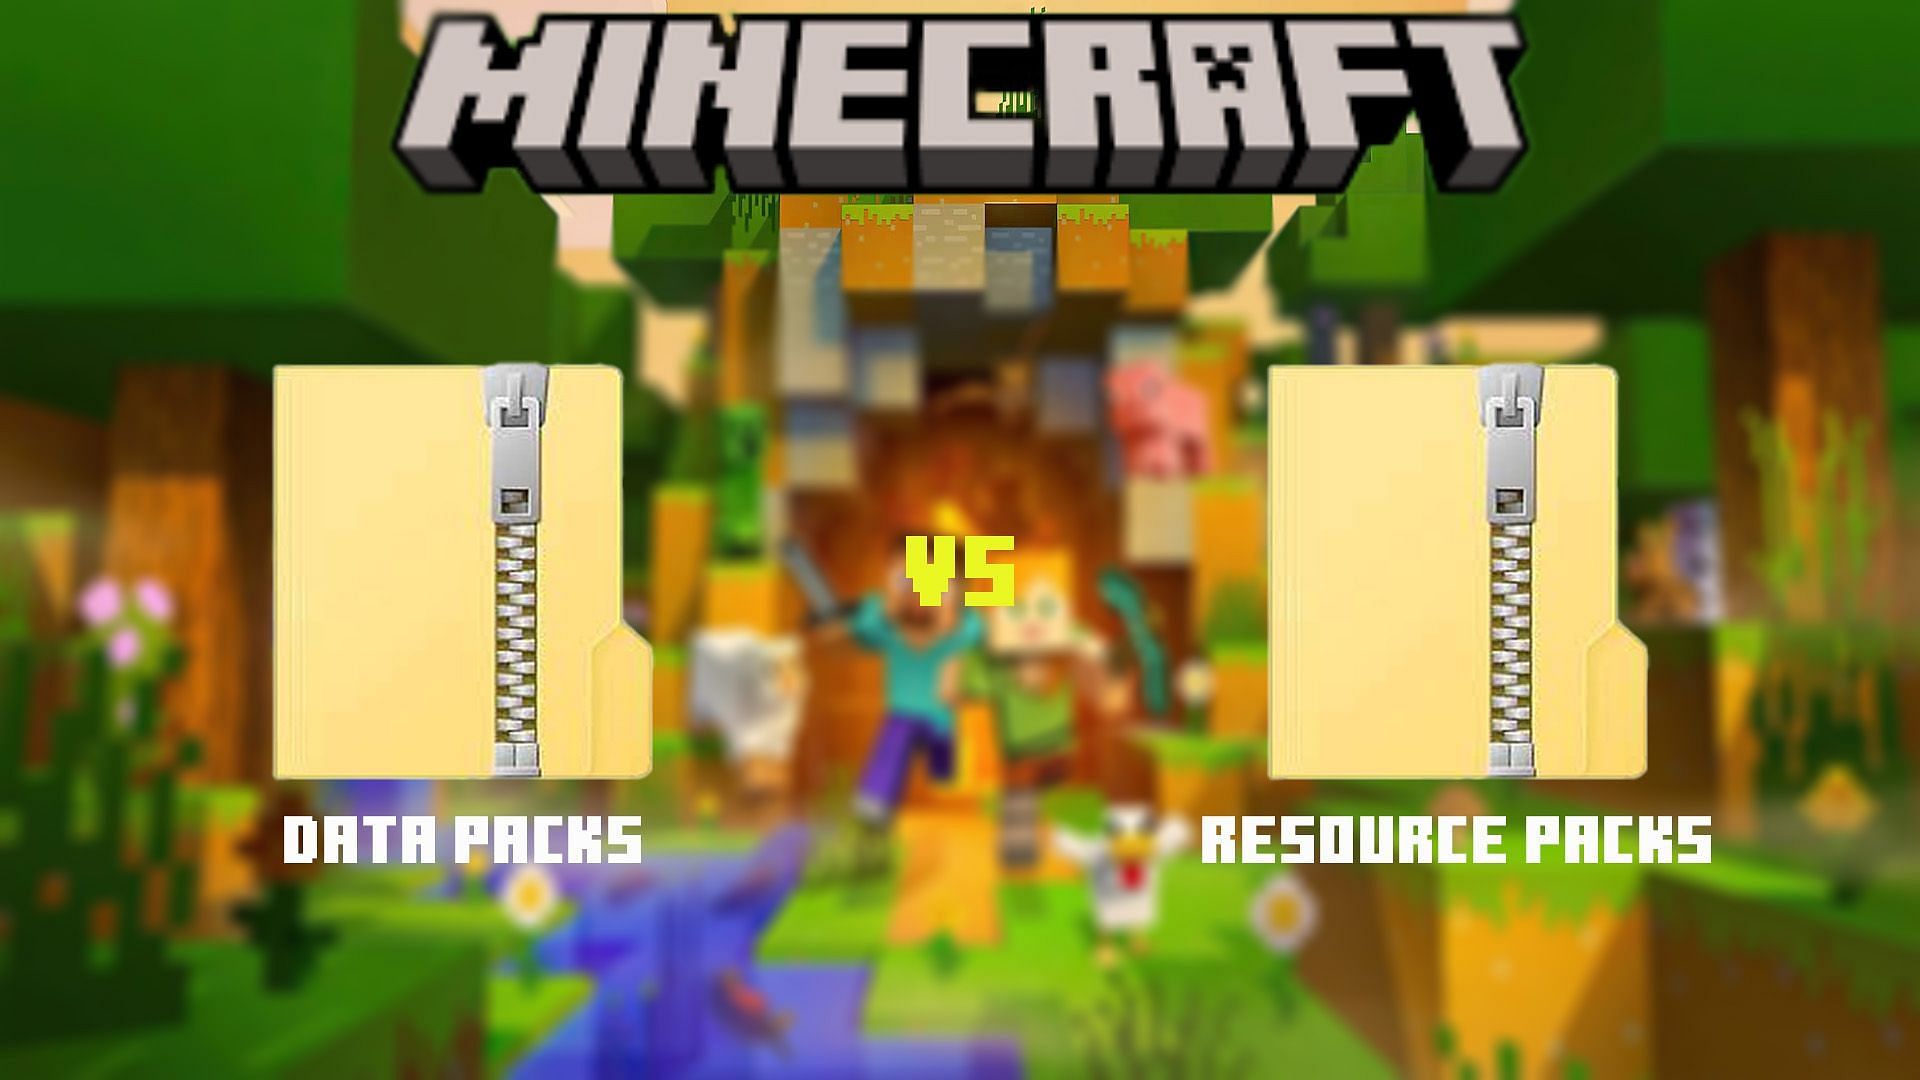 Learn the difference between a Data Pack and a Resource Pack in Minecraft (Image via Mojang) 